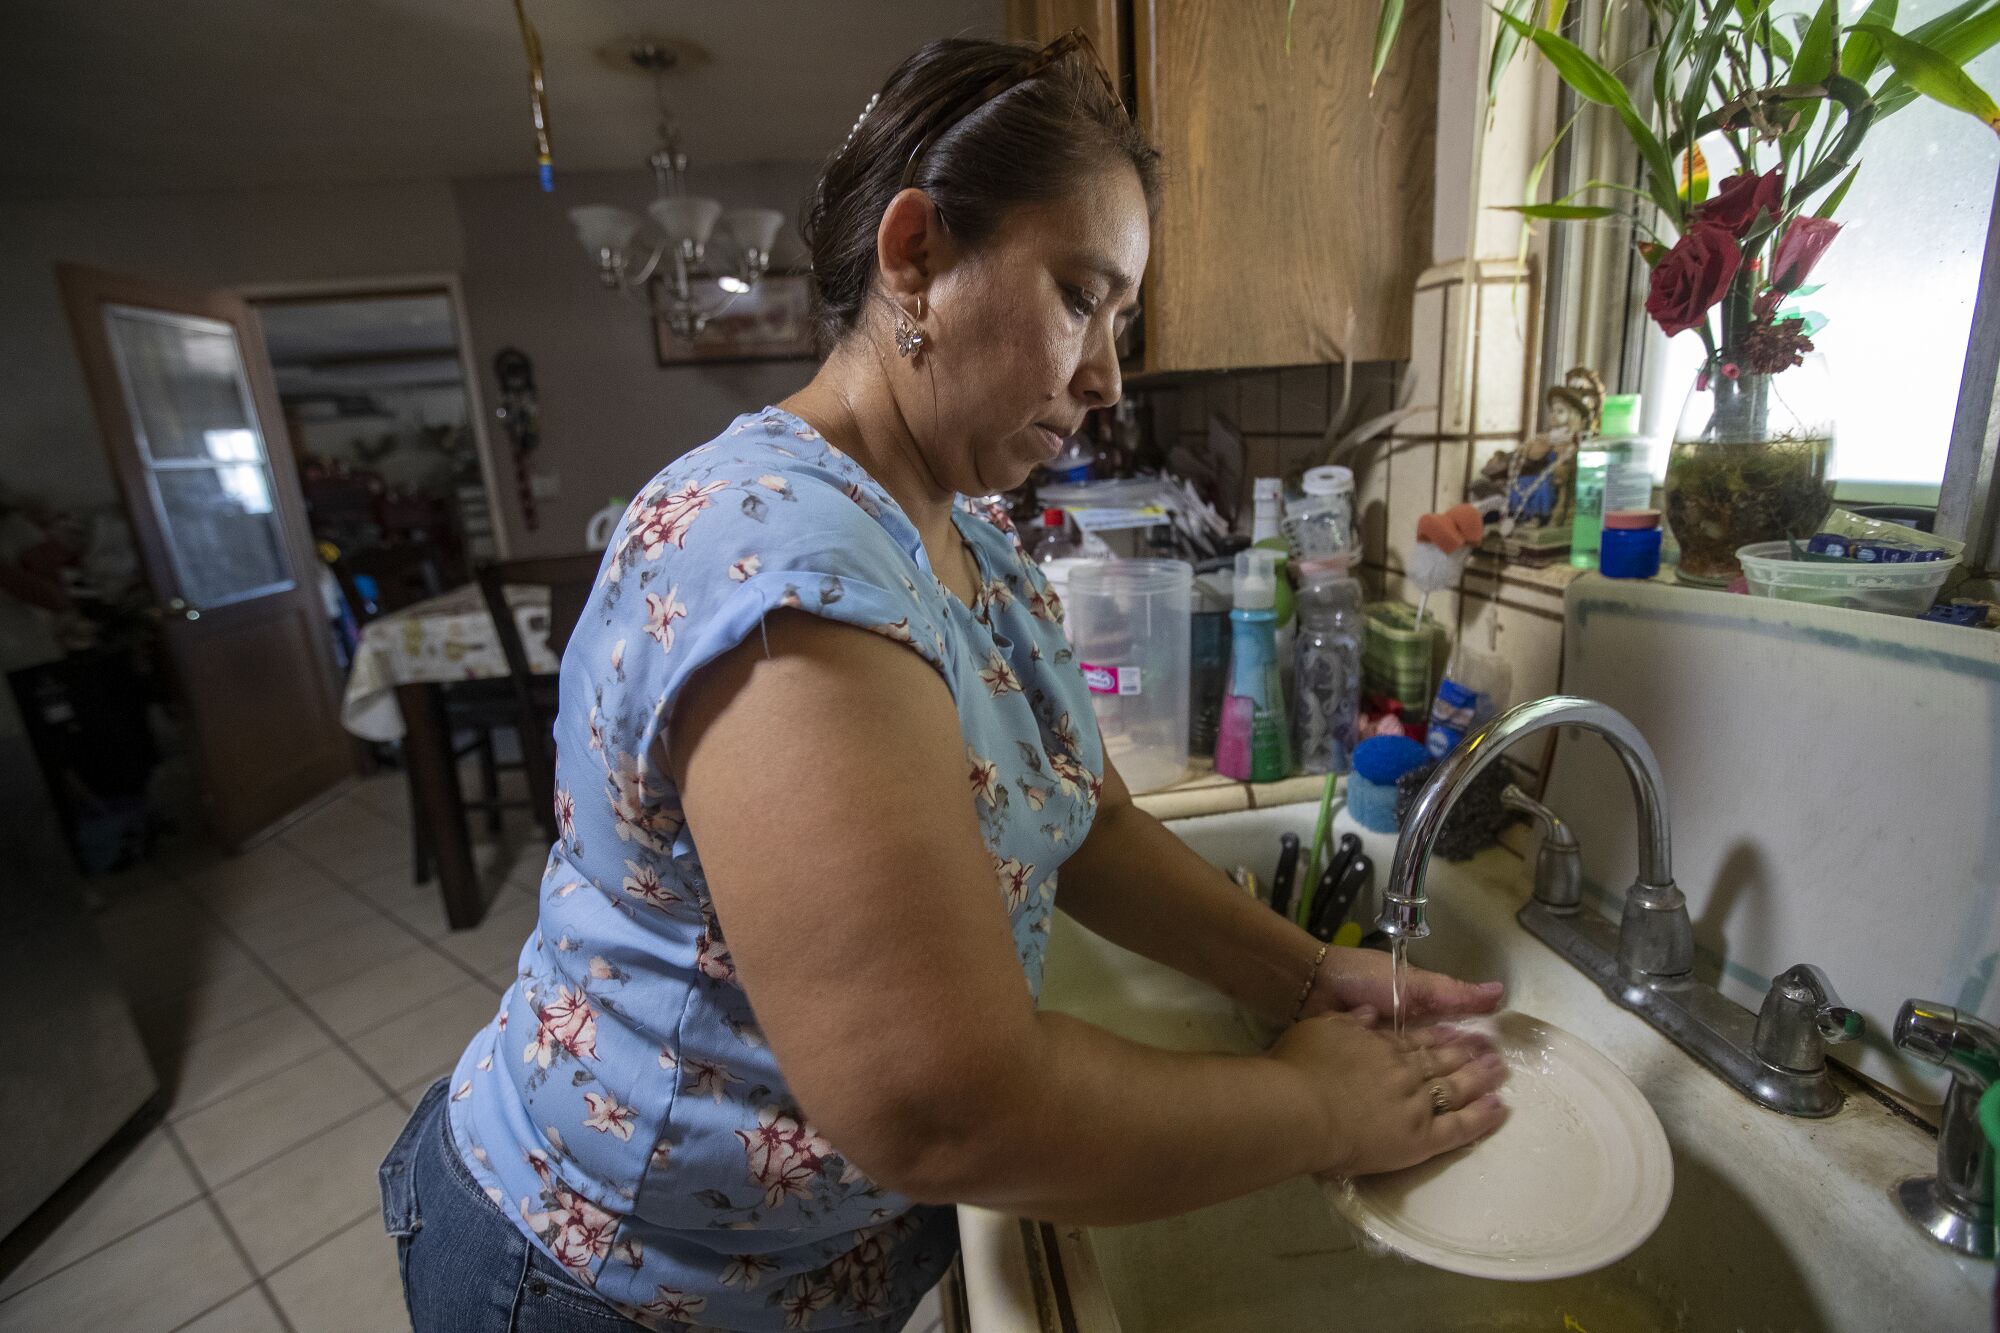 A woman washes dishes in the kitchen sink